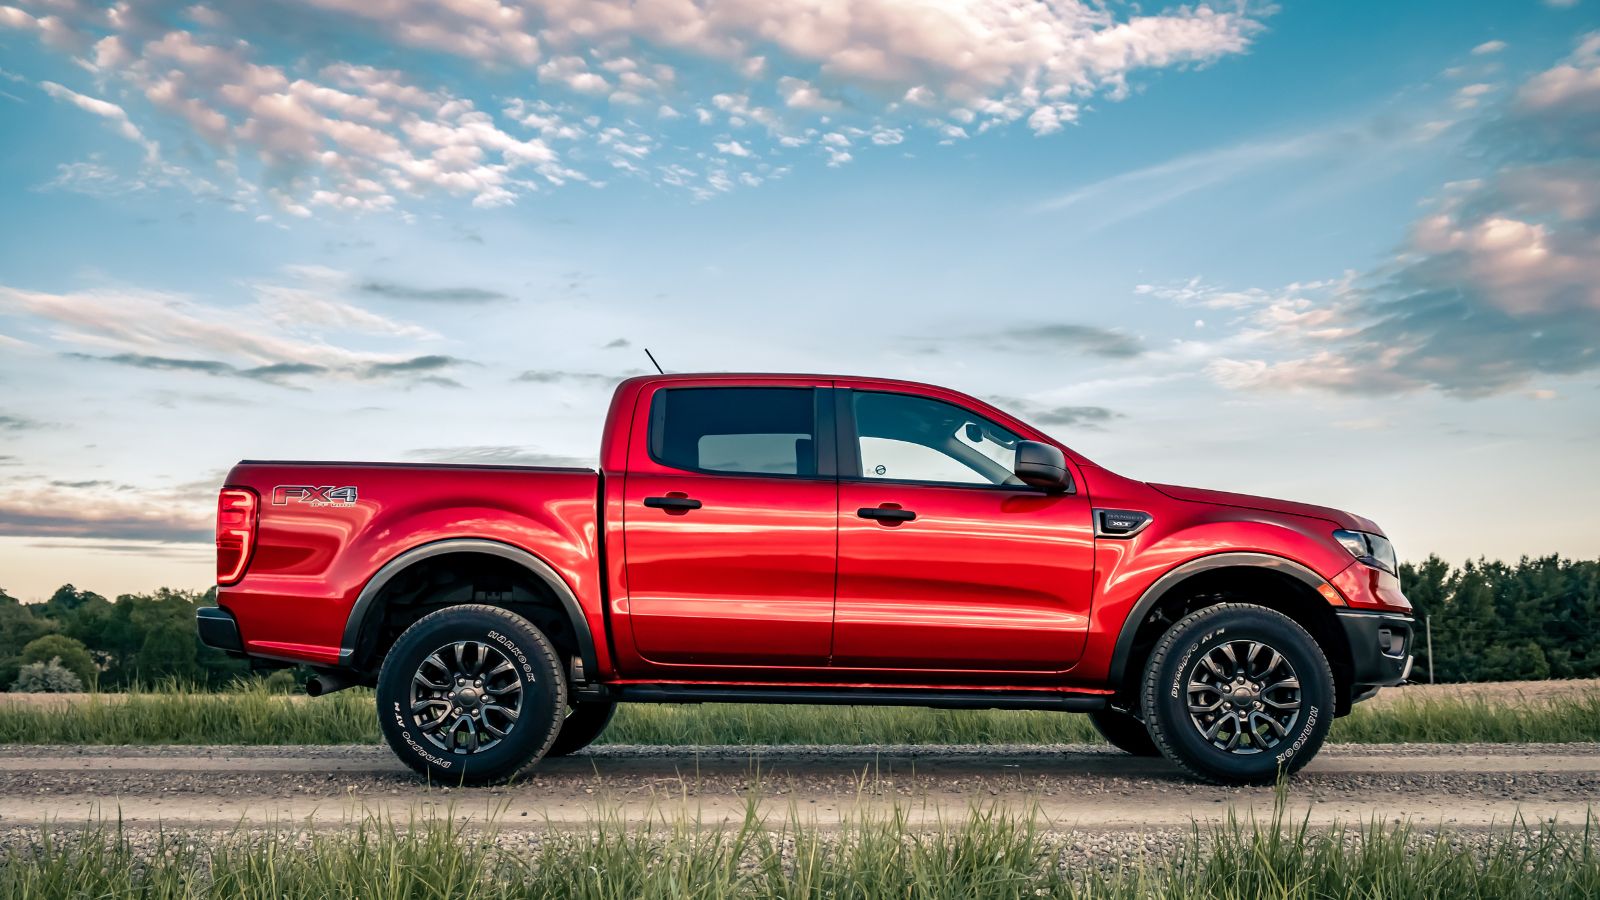 <p>The 2019 Ford Ranger marked the return of the mid-size truck to the American market after a dip in its popularity. It was largely well received at the time—practical, fun to drive, and compact. However, since then, it’s proved less than reliable. <a href="https://www.consumerreports.org/cars/used-cars-to-avoid-buying-a4034931071/">Consumer Reports</a> lists it as the most likely used American vehicle to incur repair costs.</p>